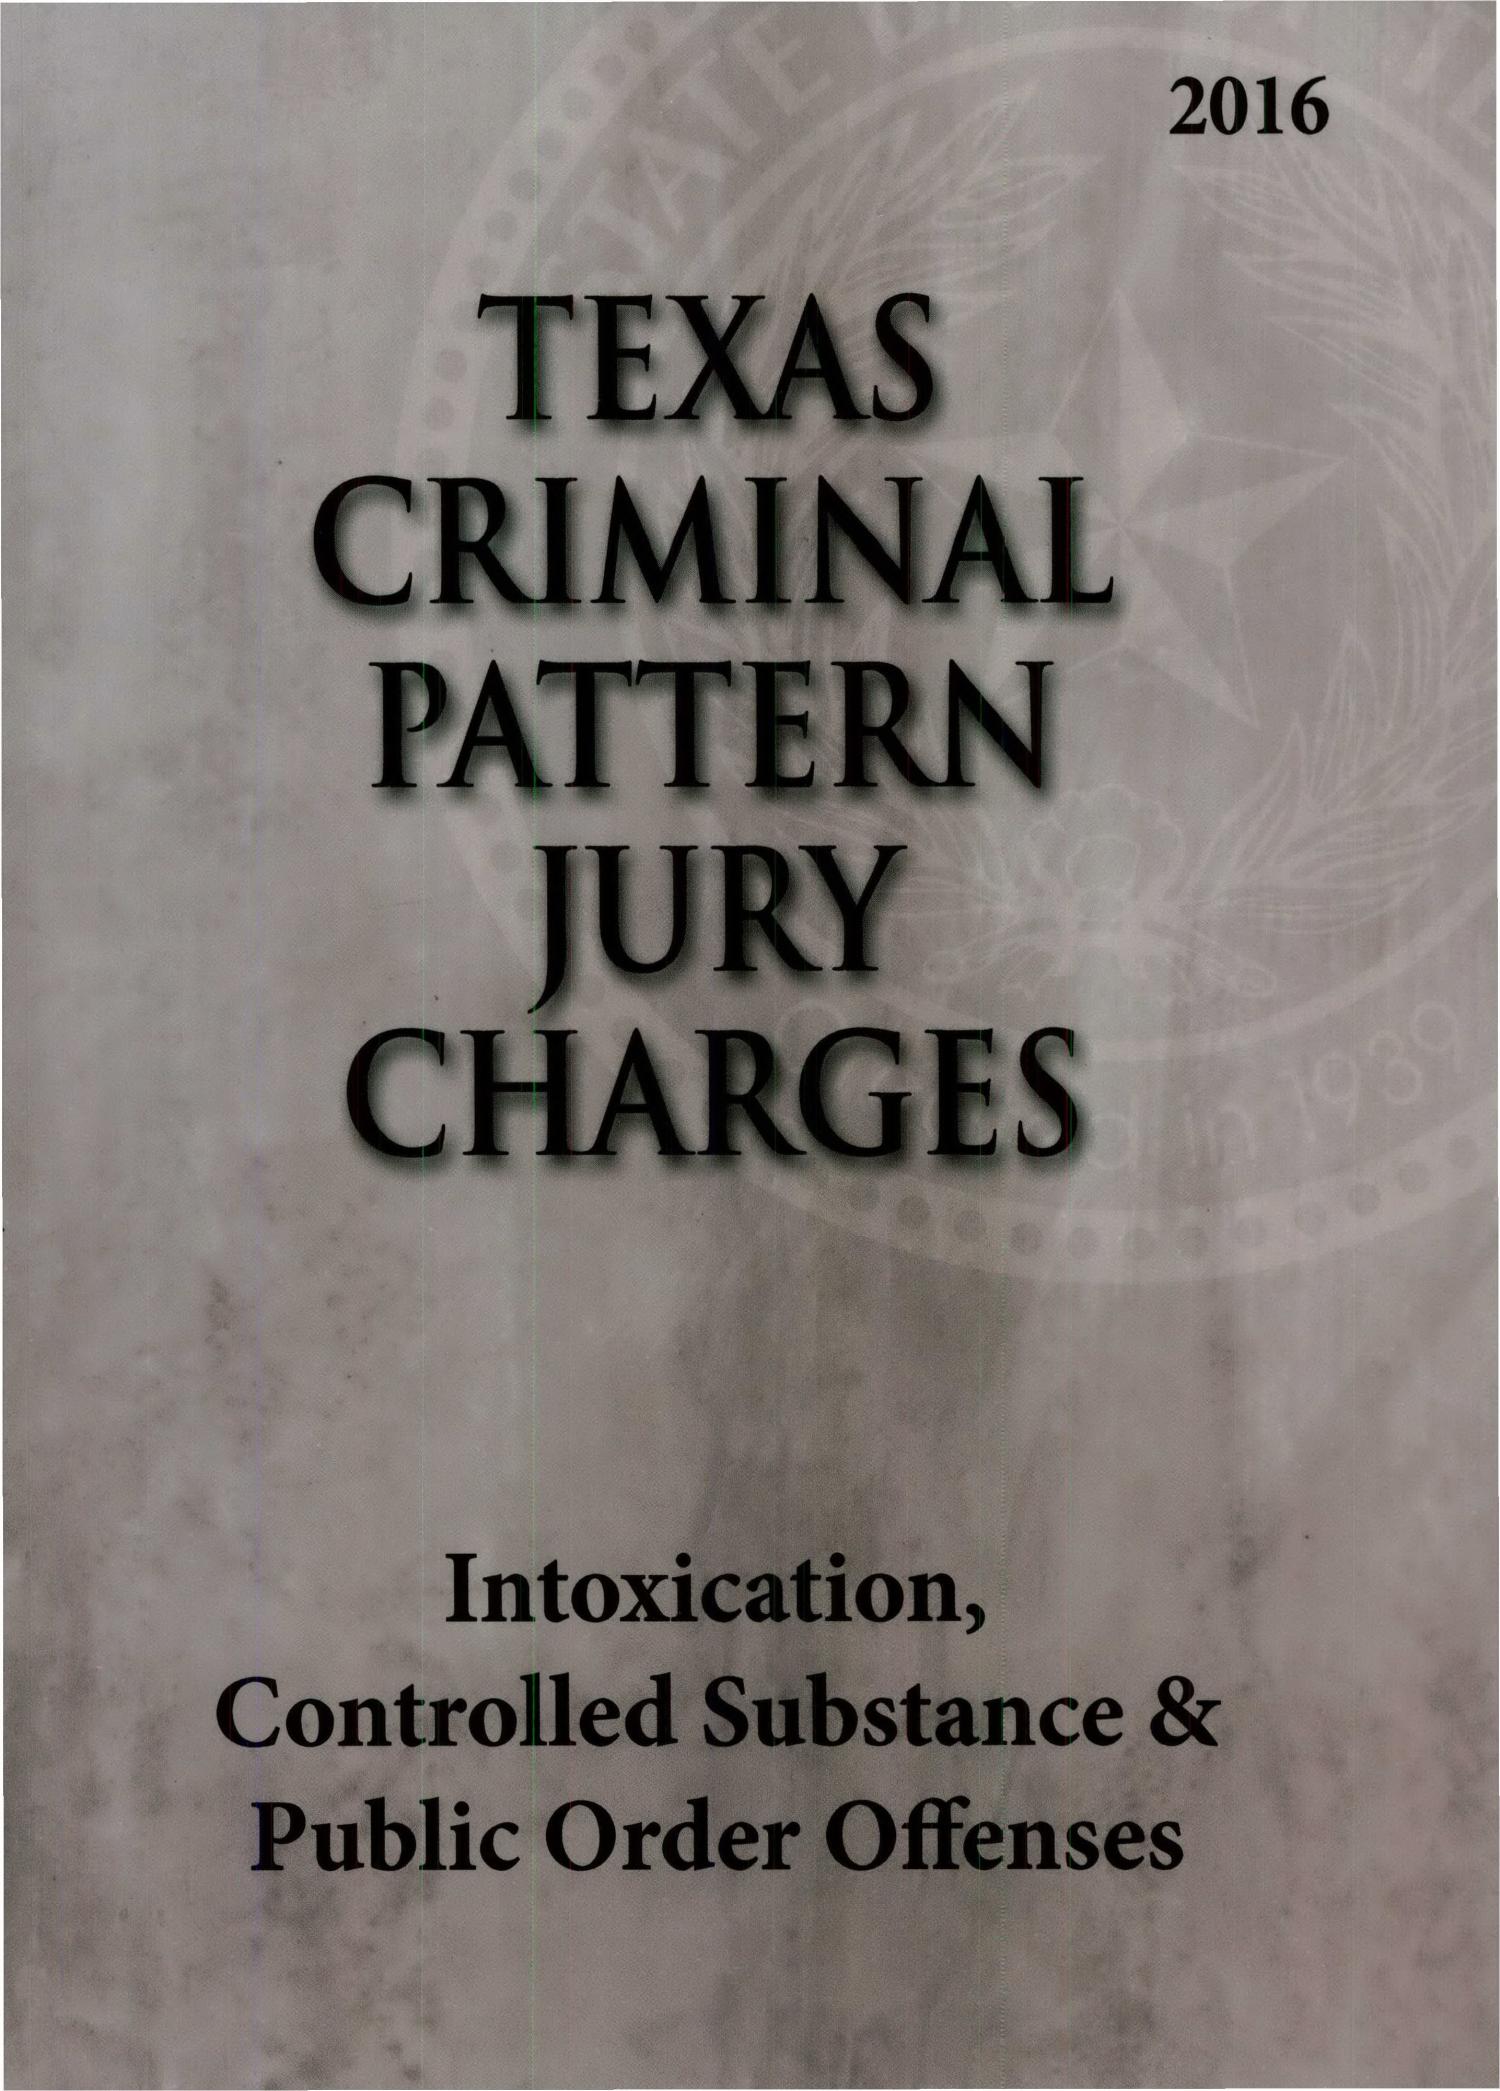 Texas Criminal Pattern Jury Charges: Intoxication, Controlled